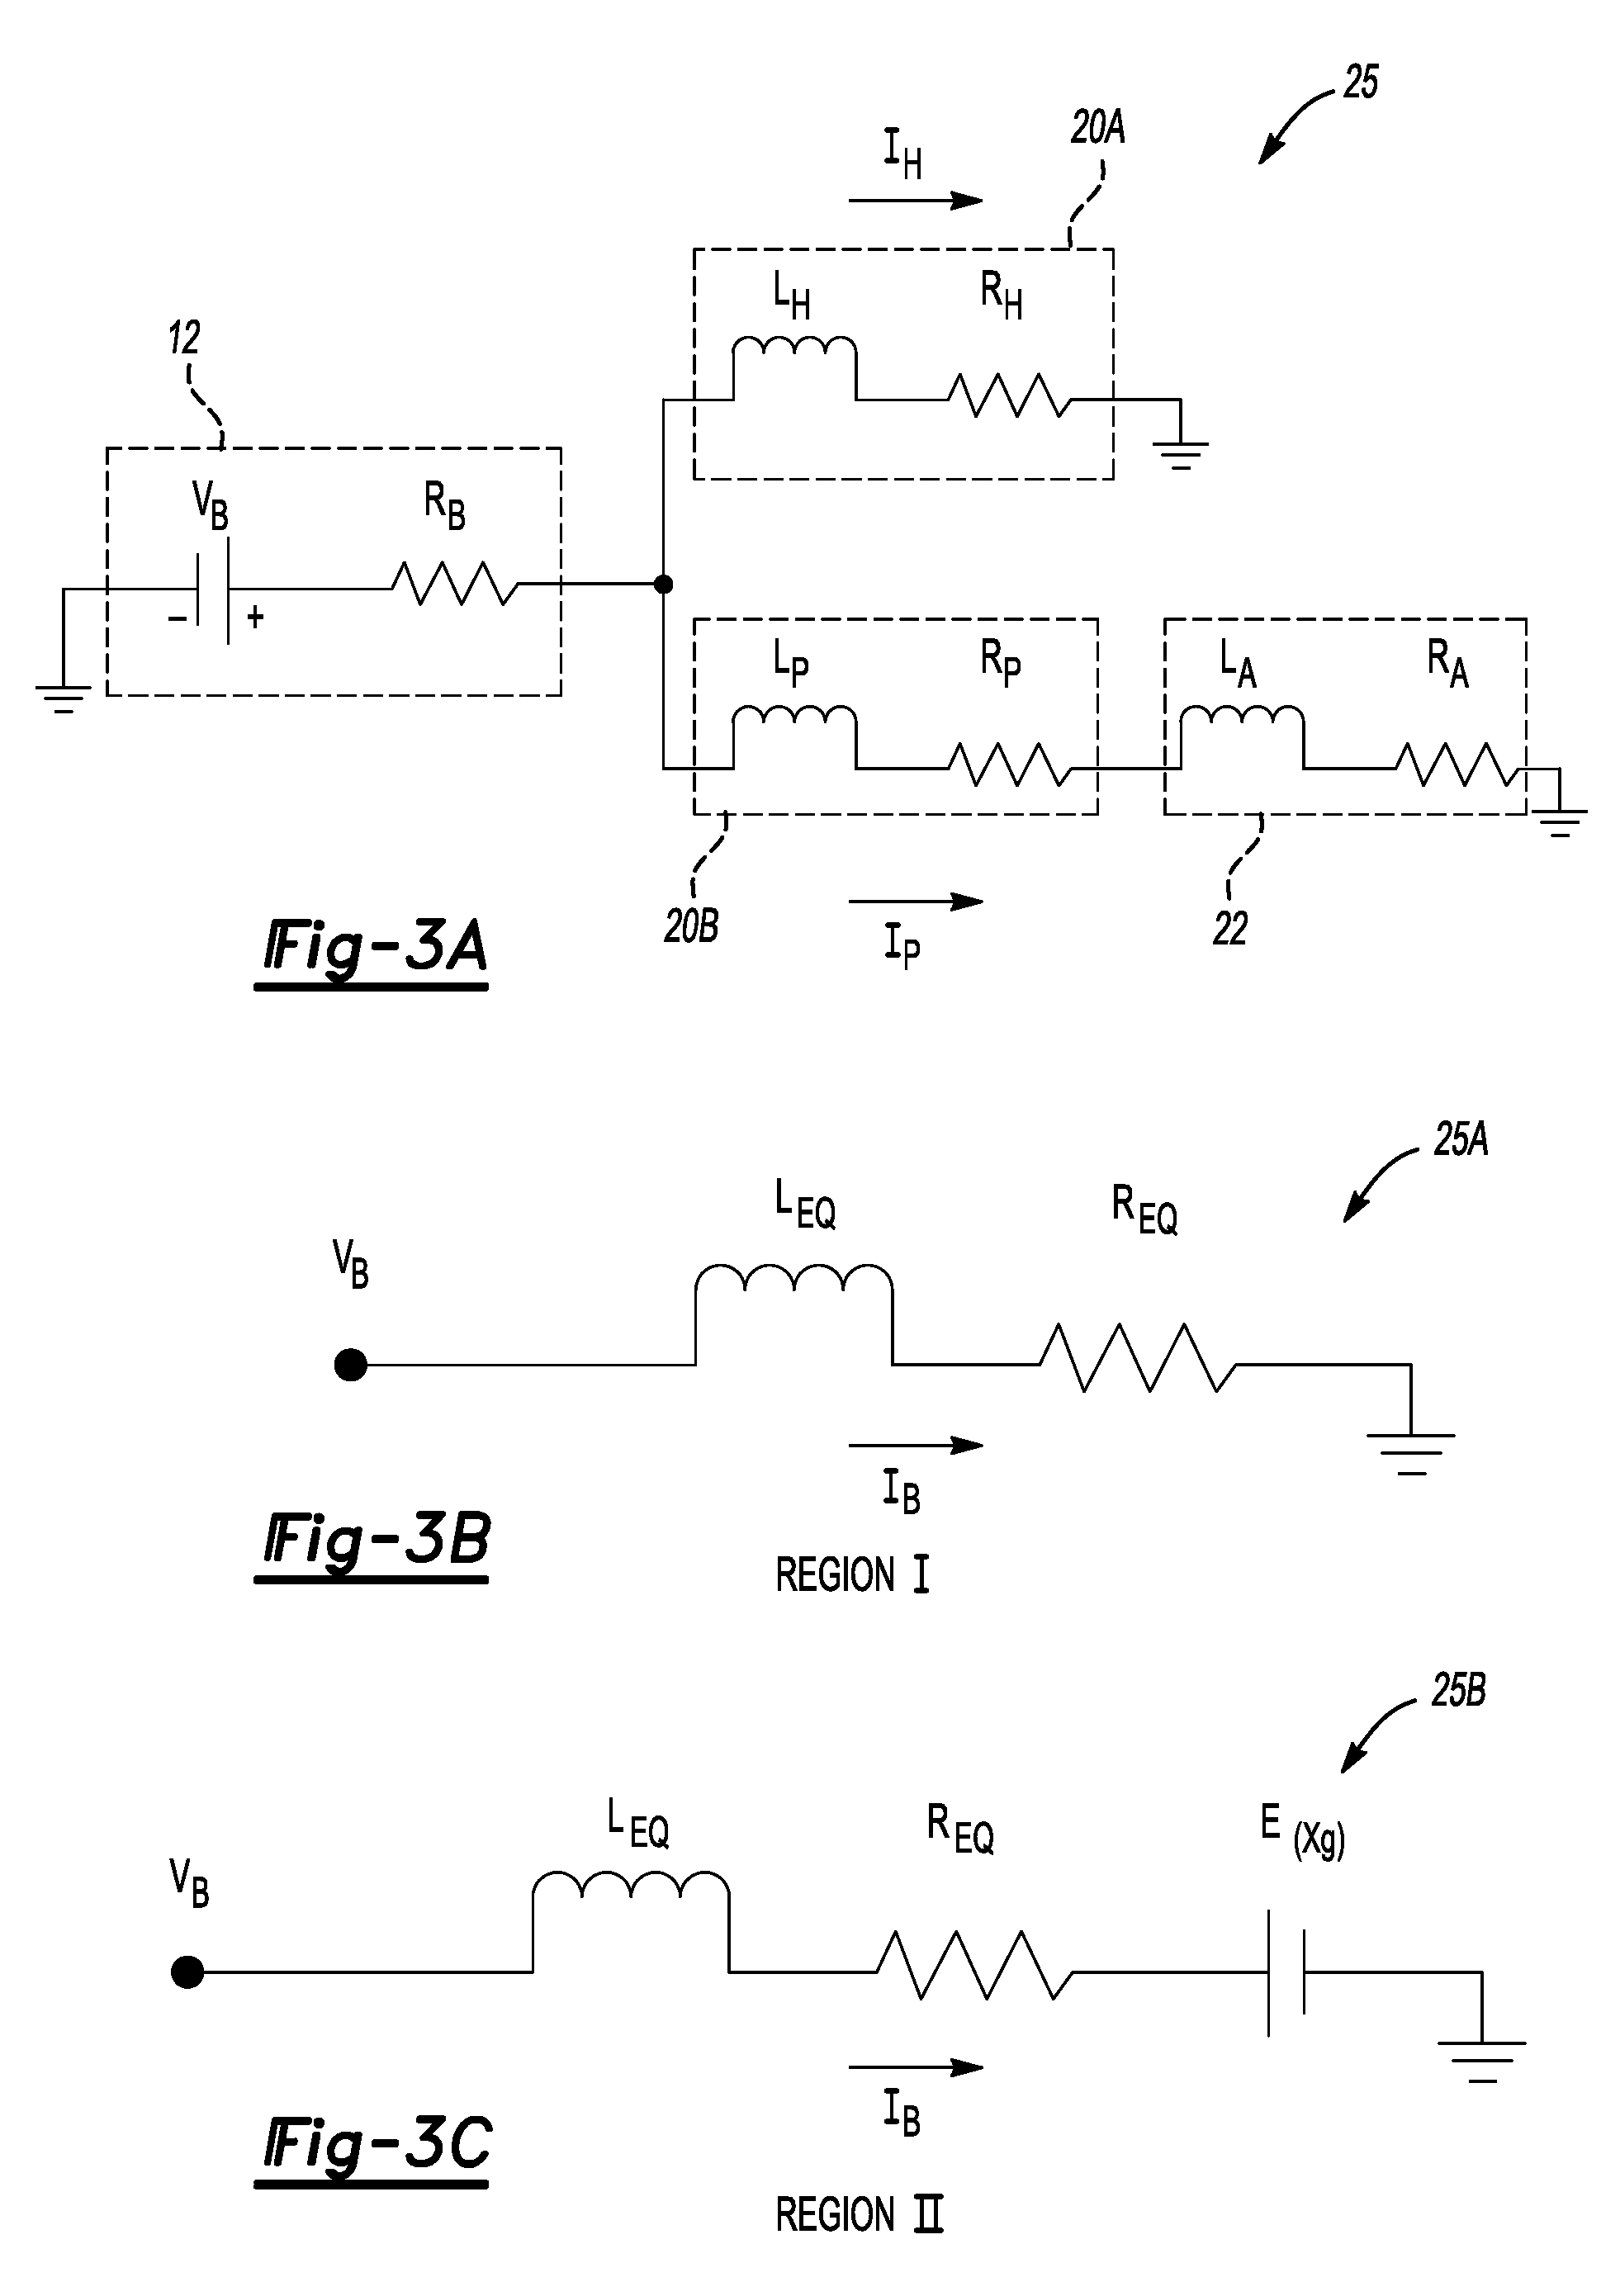 Method and apparatus for monitoring solenoid health